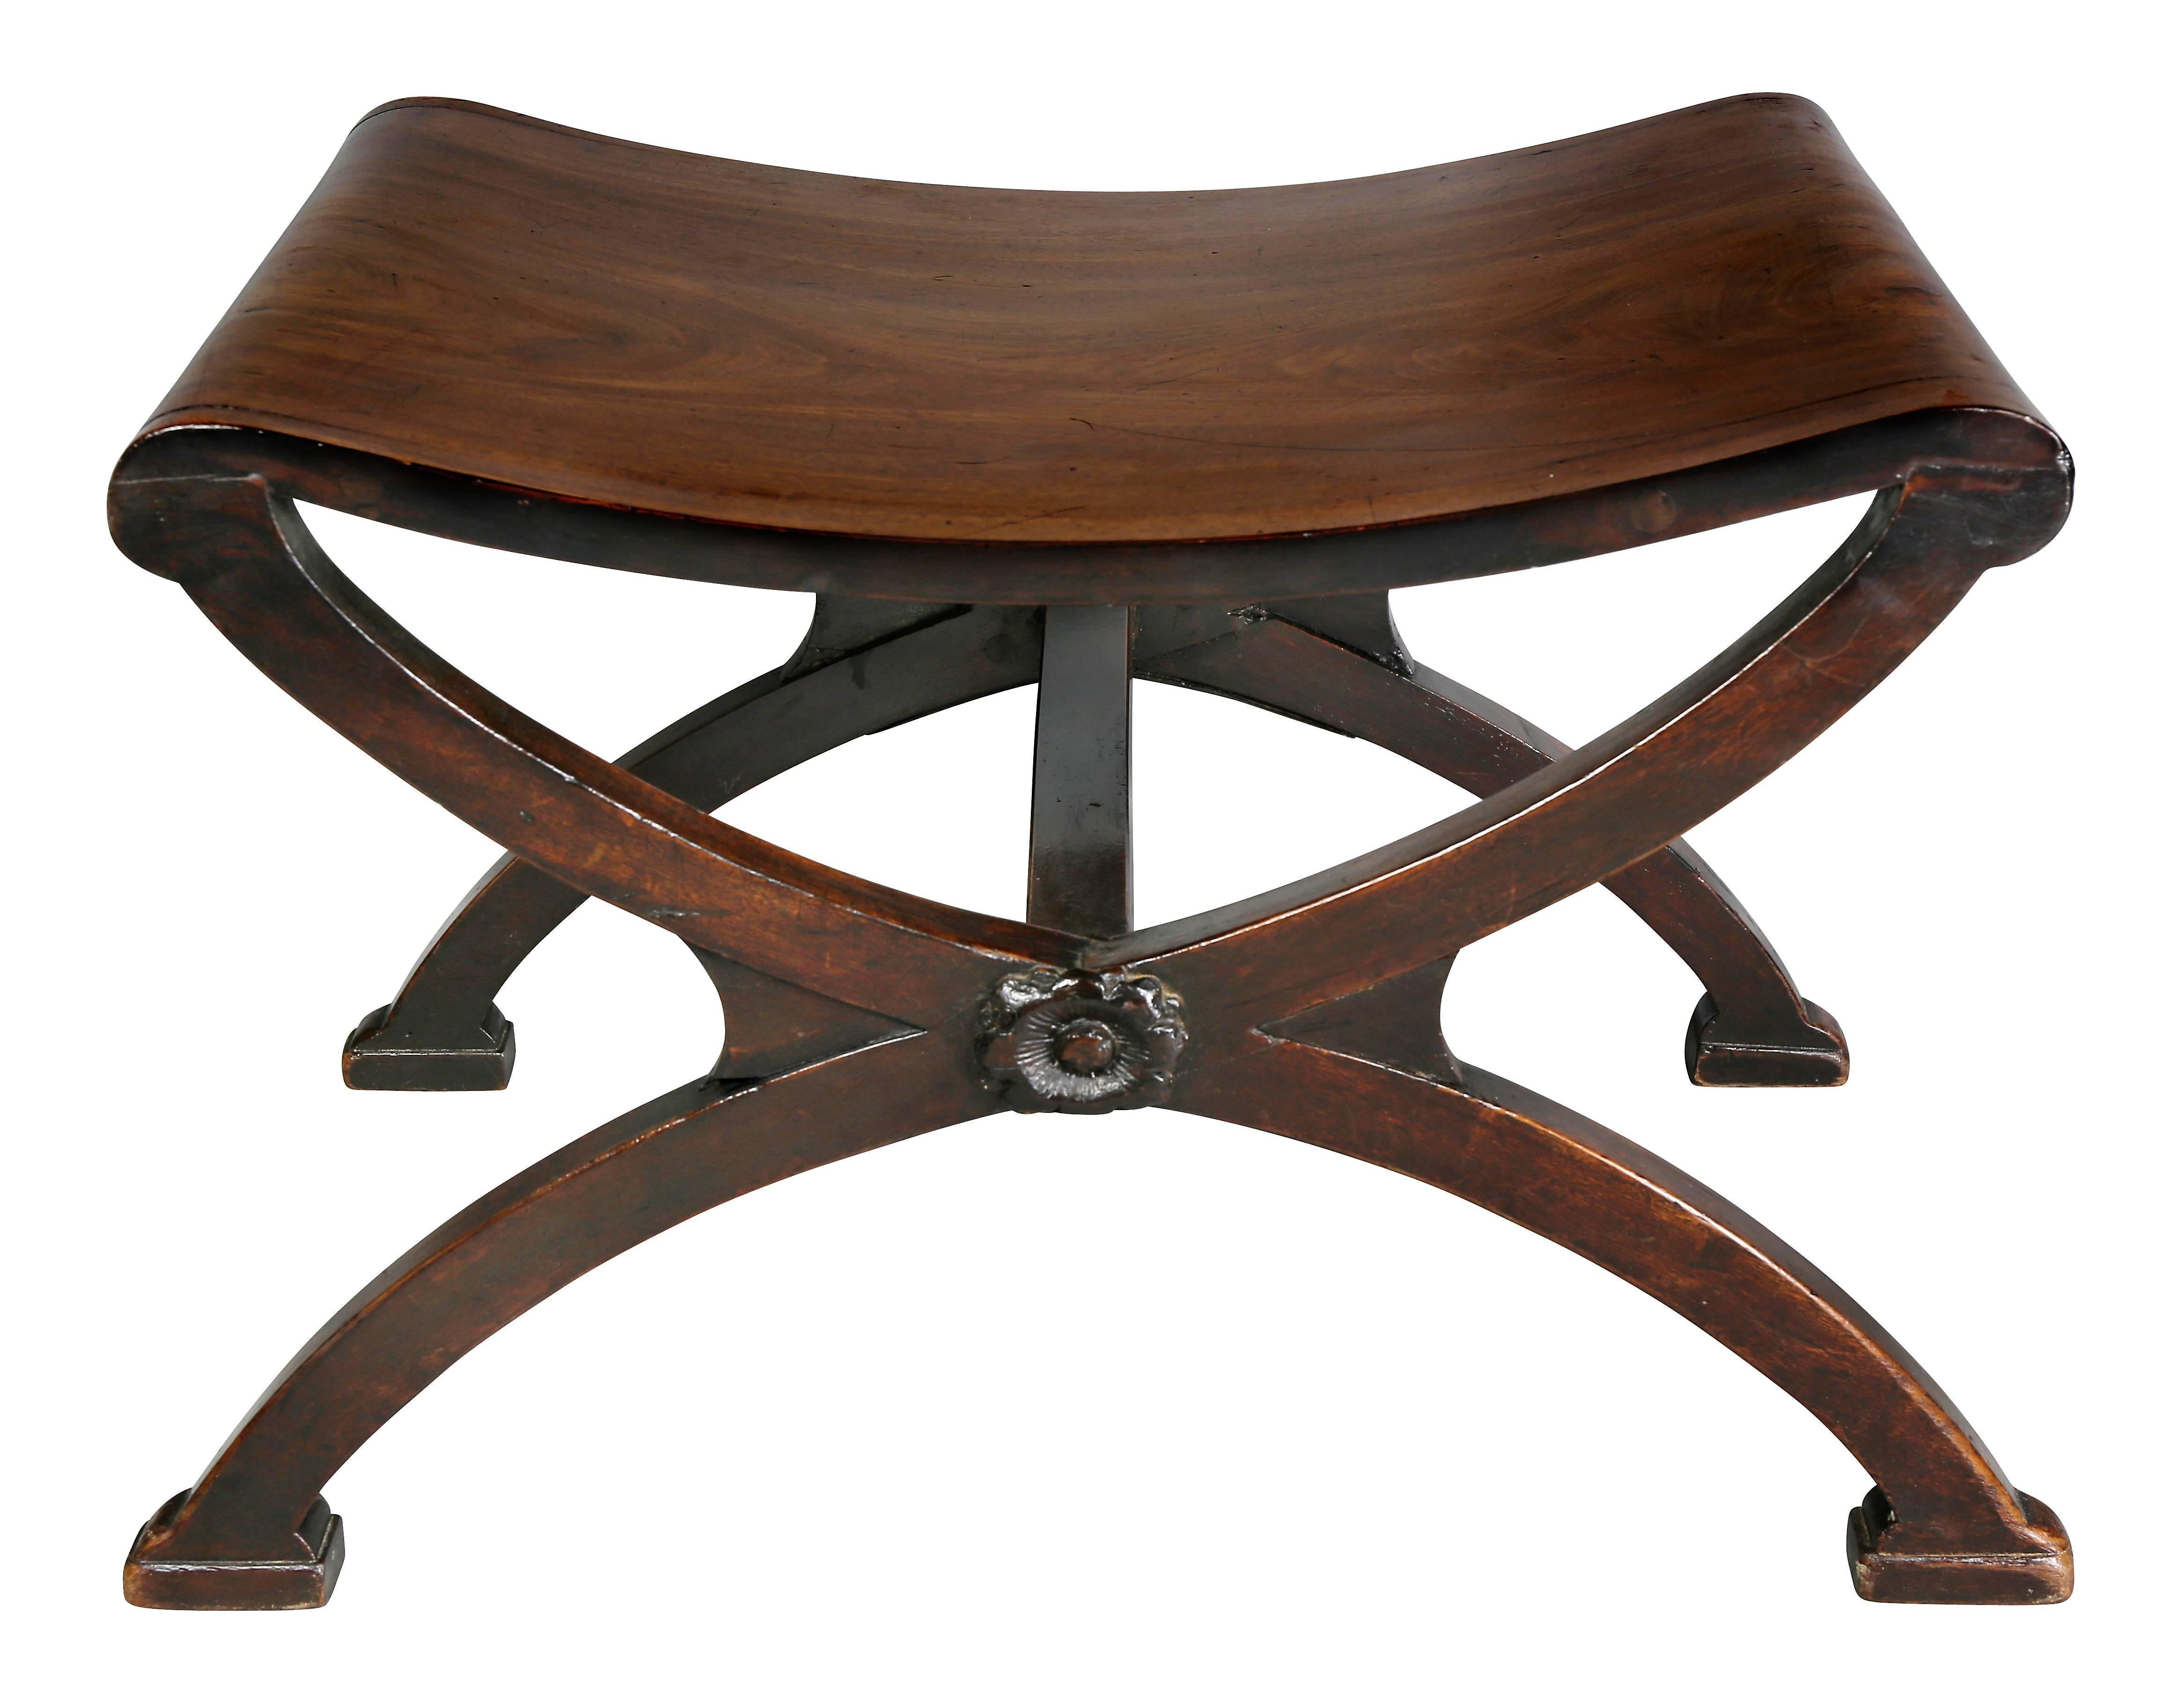 With rectangular wood saddle seat raised on X-form supports joined by square stretcher with rosette.